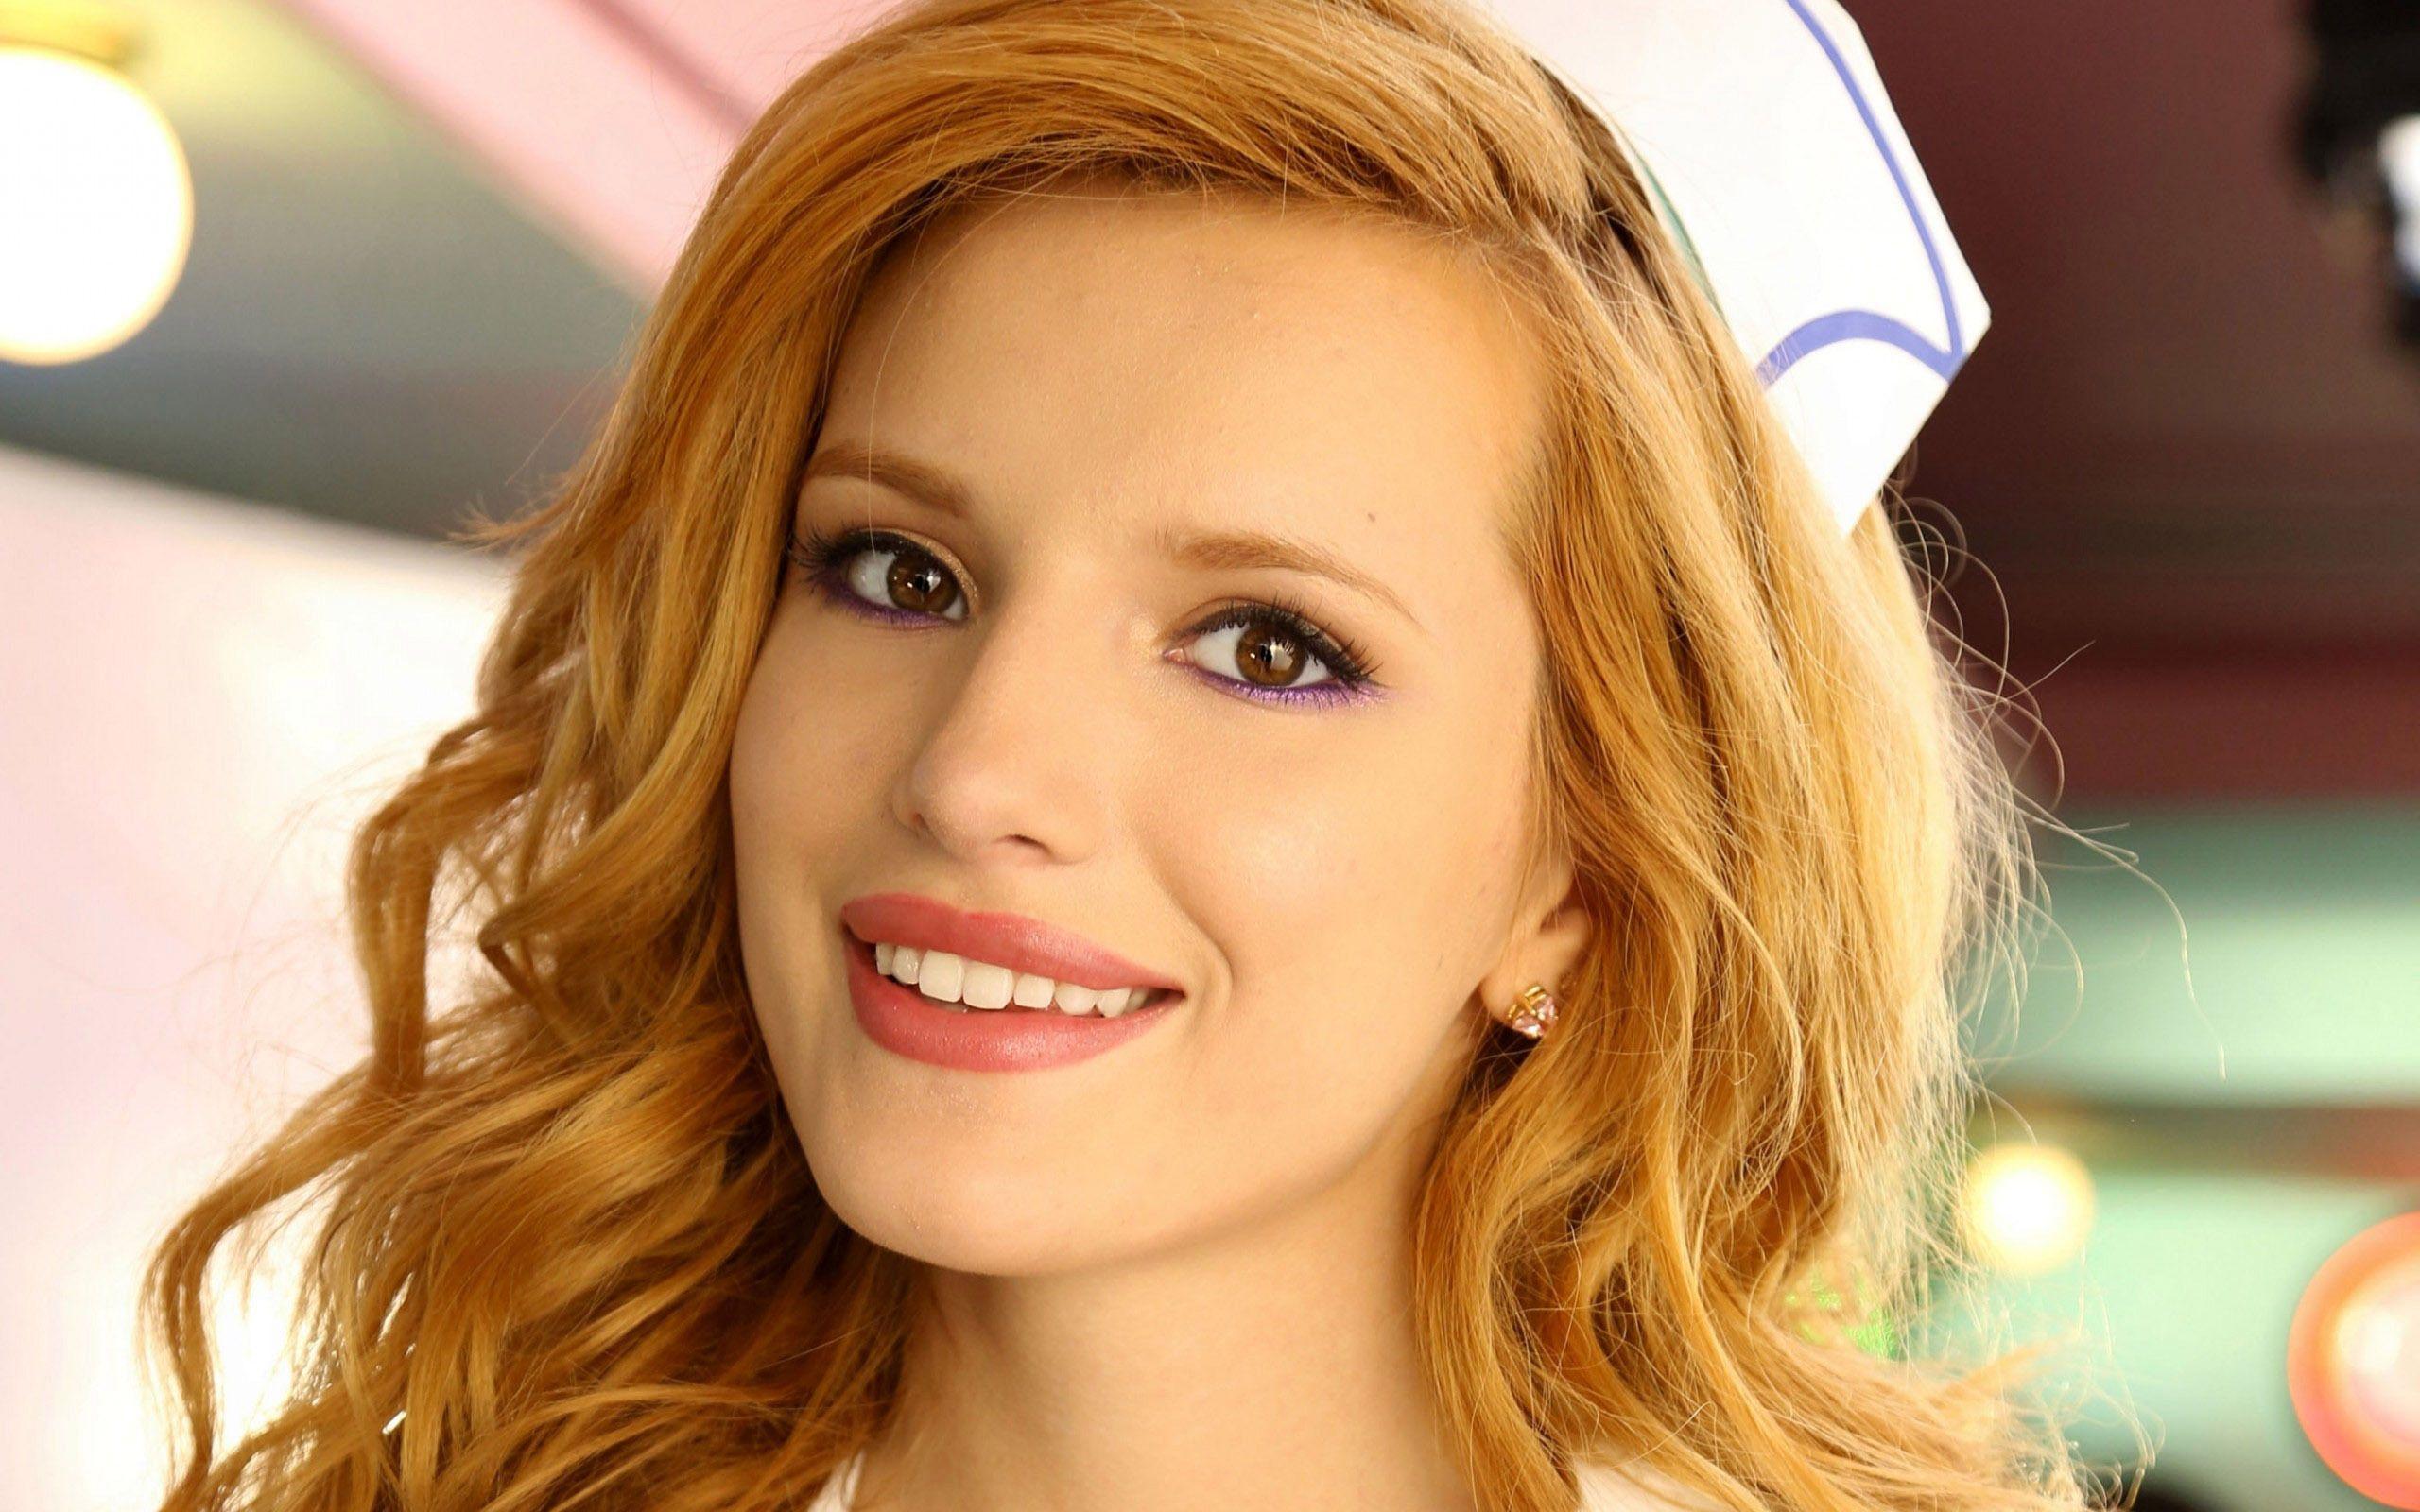 Bella Thorne Wallpaper Image Photo Picture Background